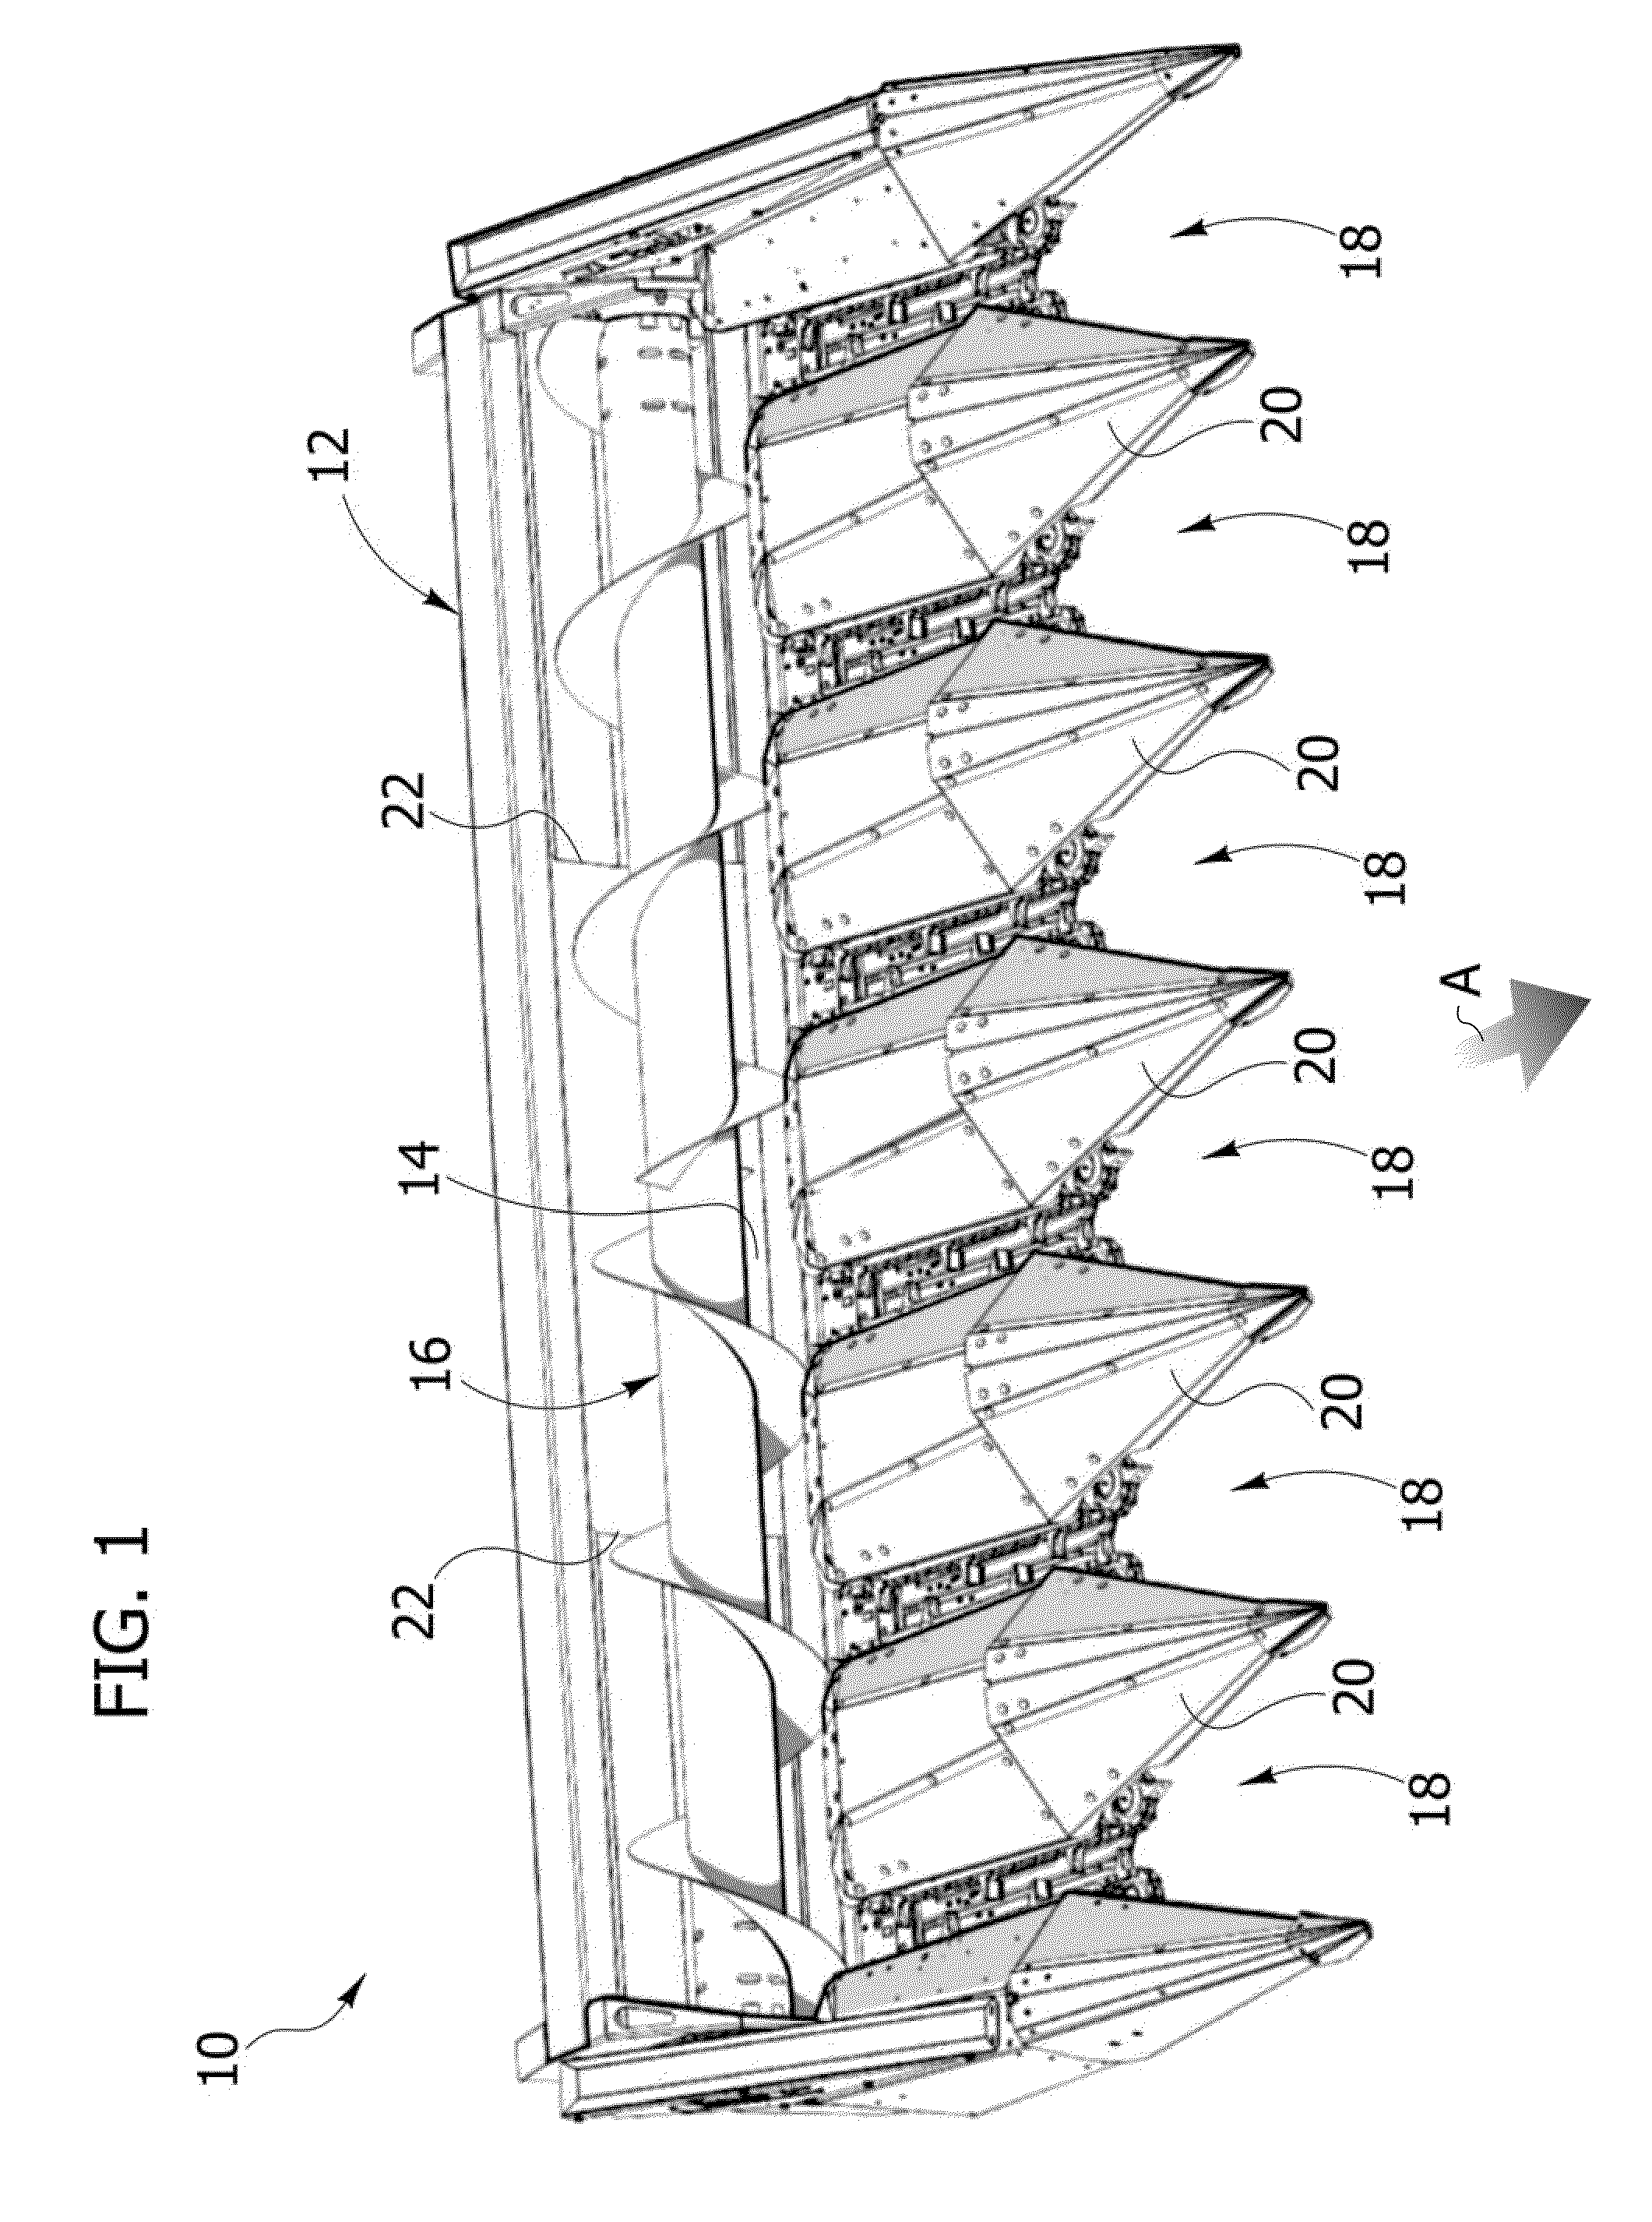 Machine for decreasing force exerted on maize during harvesting